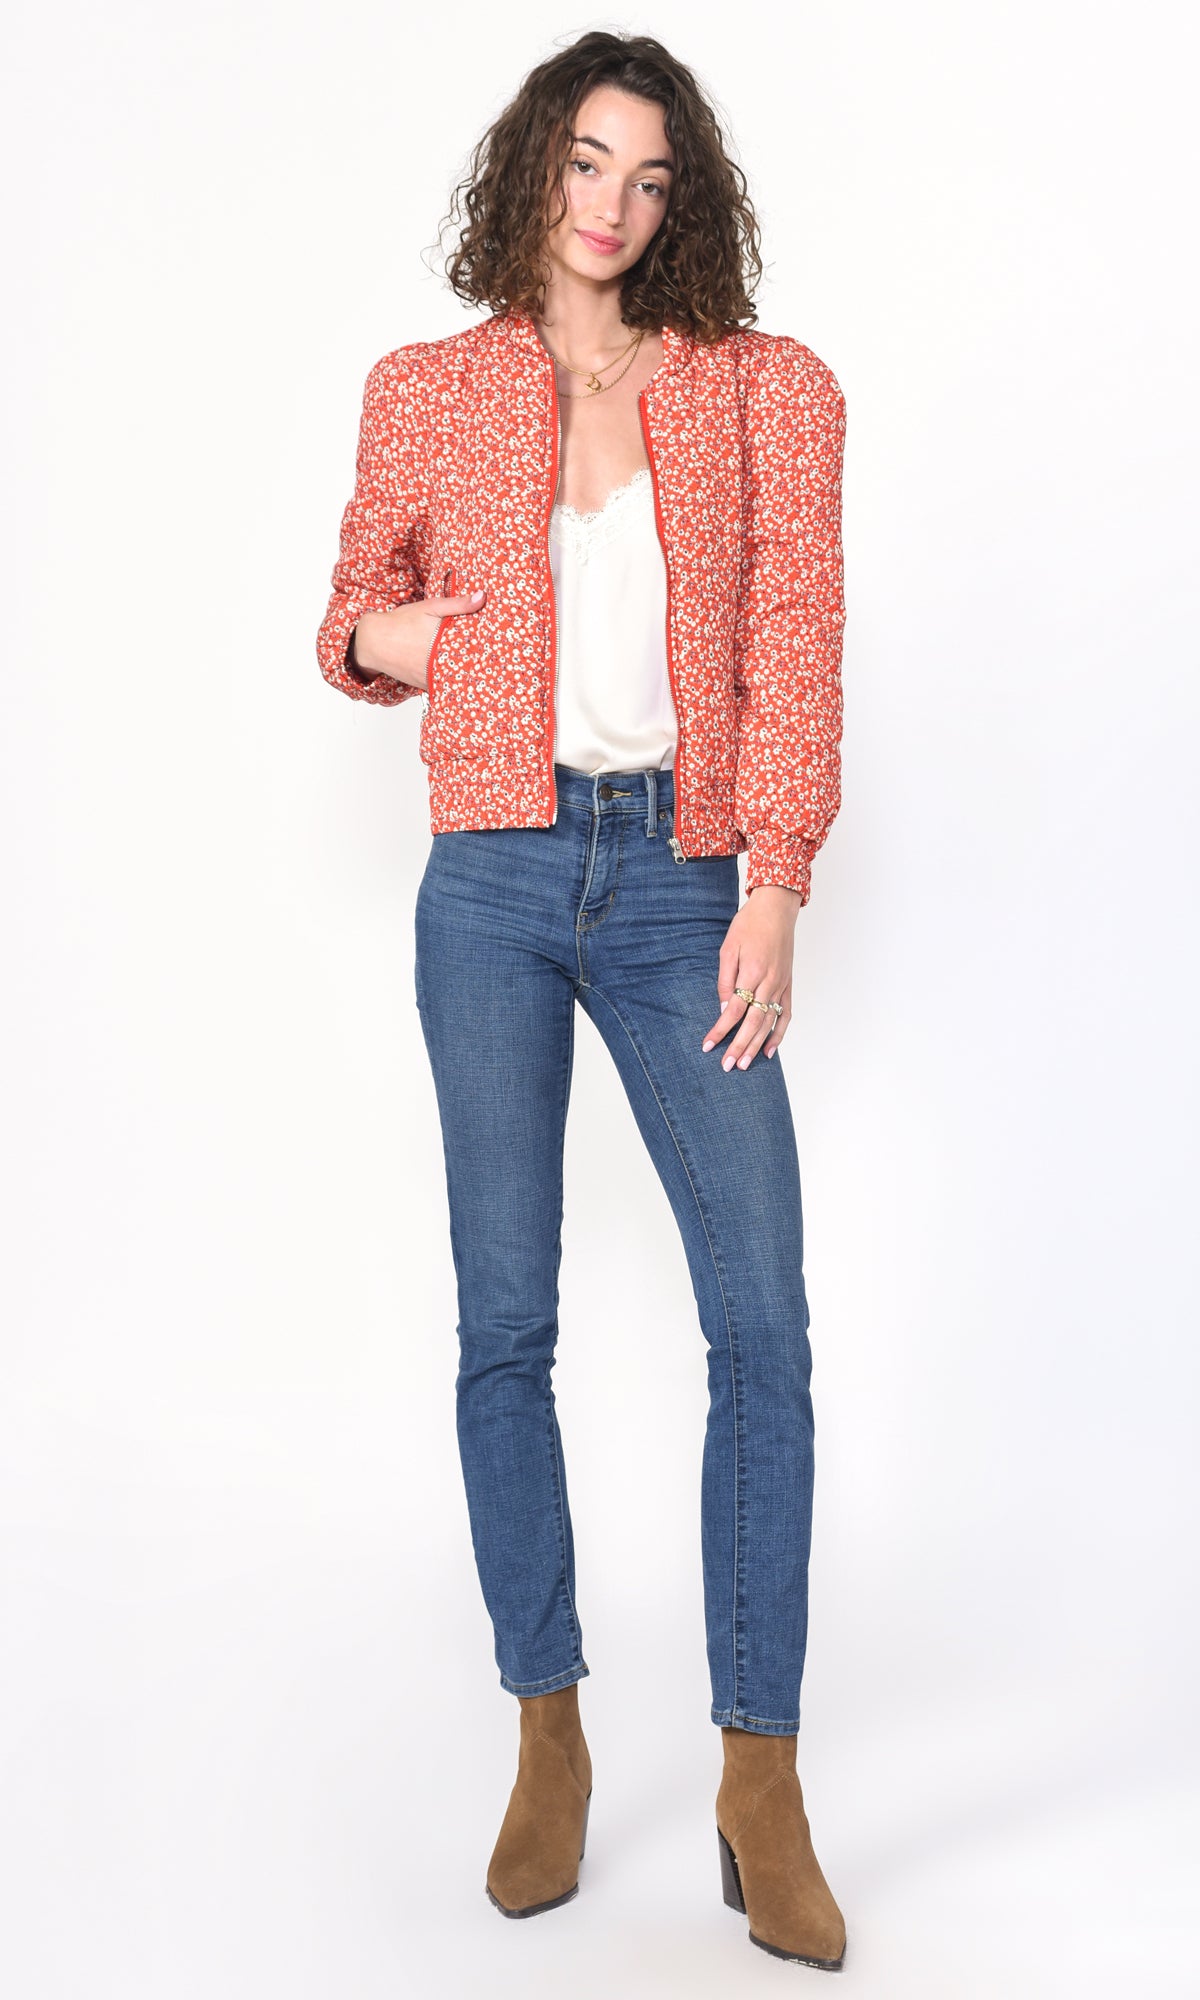 Simone is wearing a bomber jacket made from floral jacquard knit